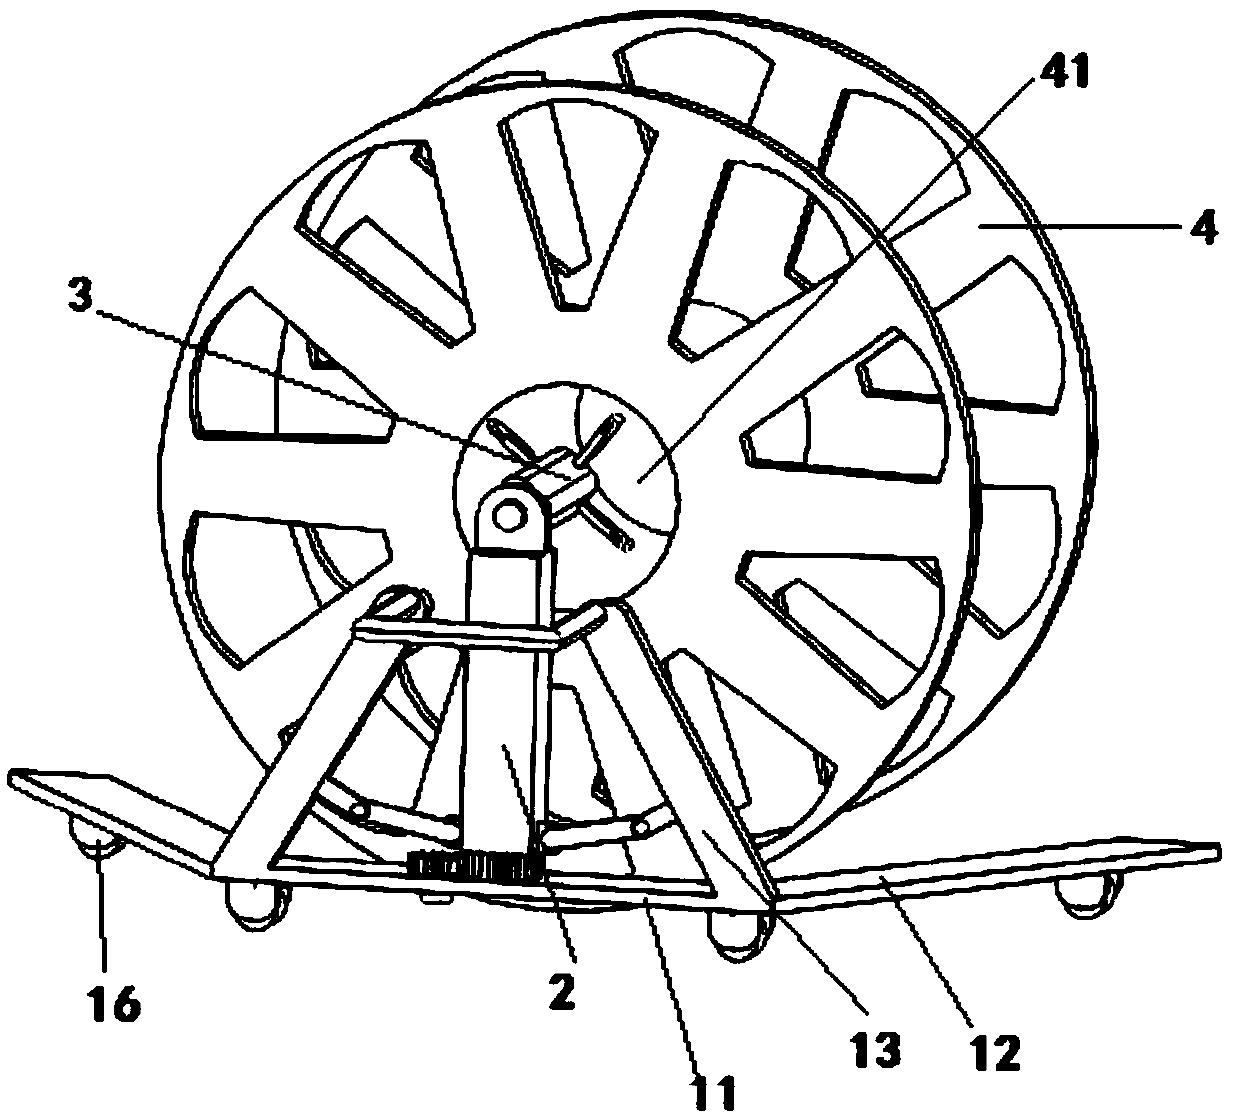 A high-efficiency optical cable reel pay-off device from the upper reel